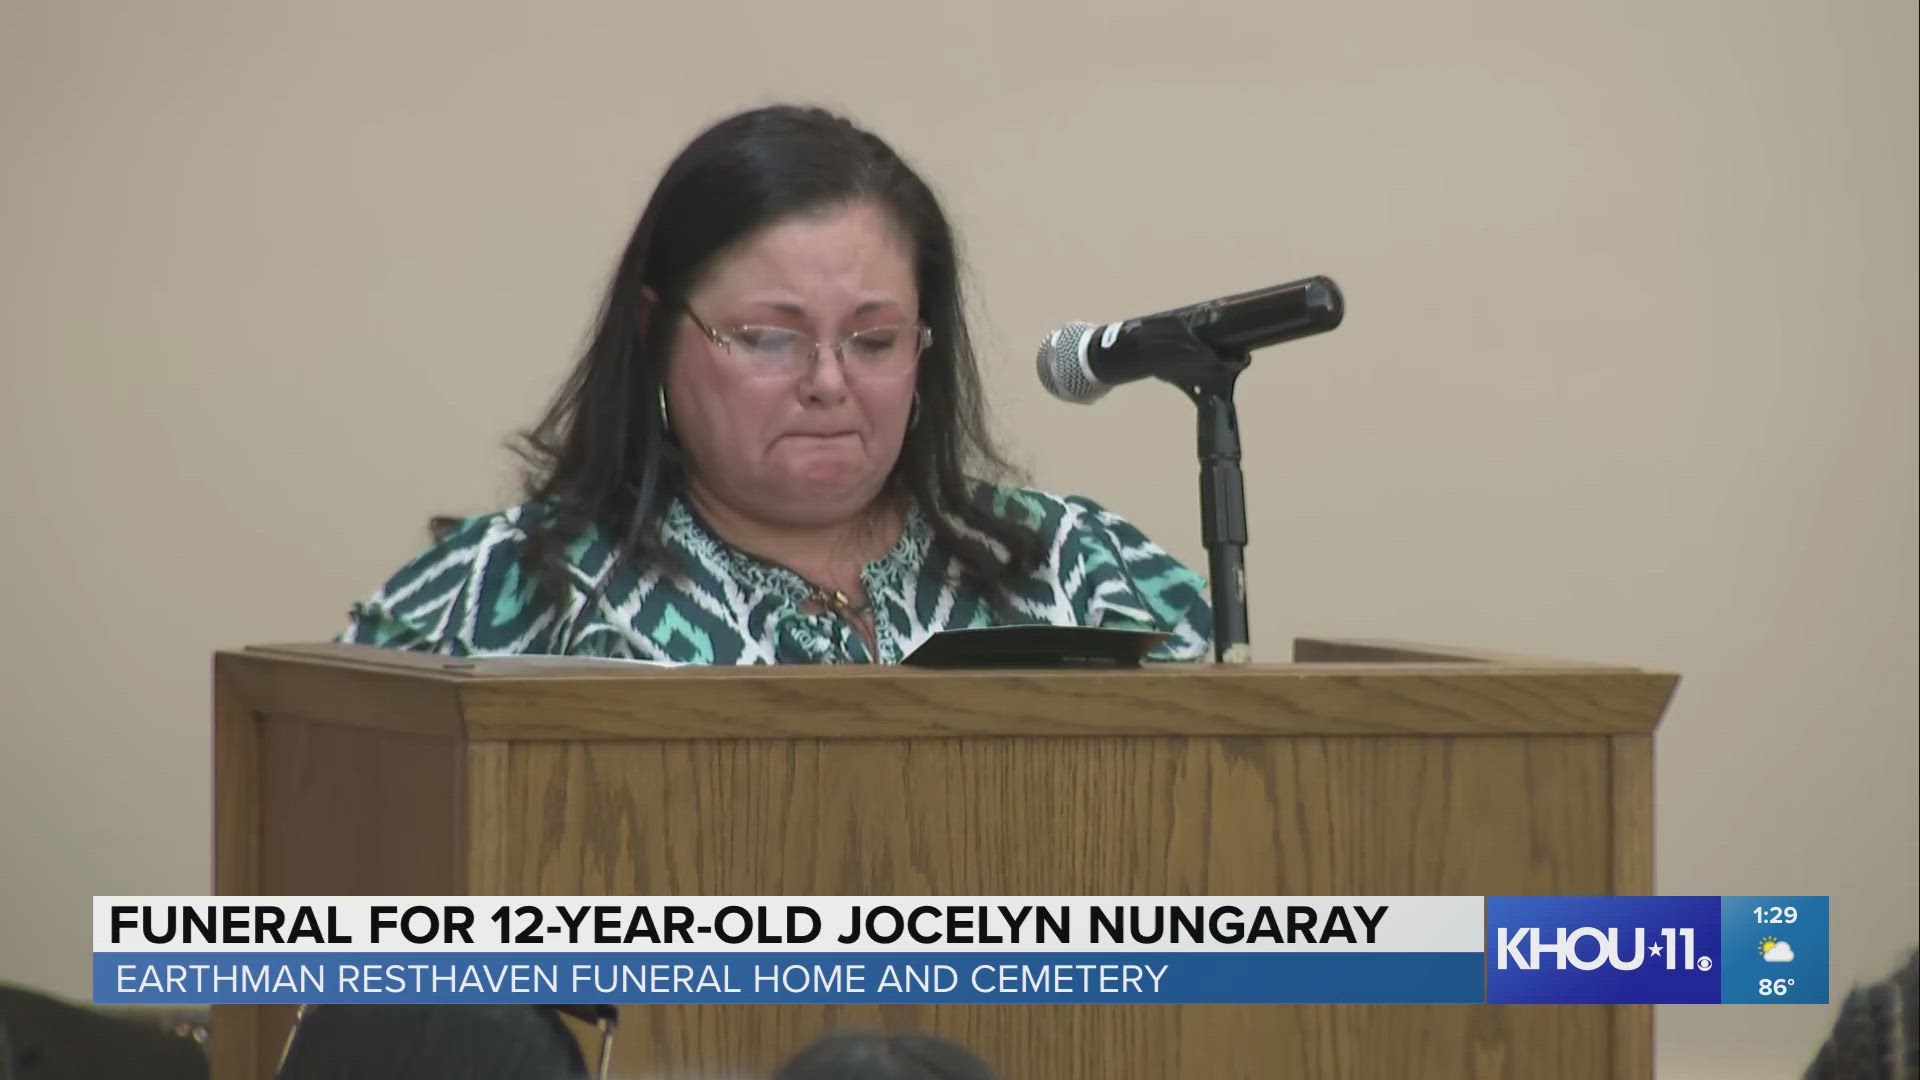 Jocelyn Nungaray's aunt spoke at the 12-year-old girl's funeral, sharing fond memories.